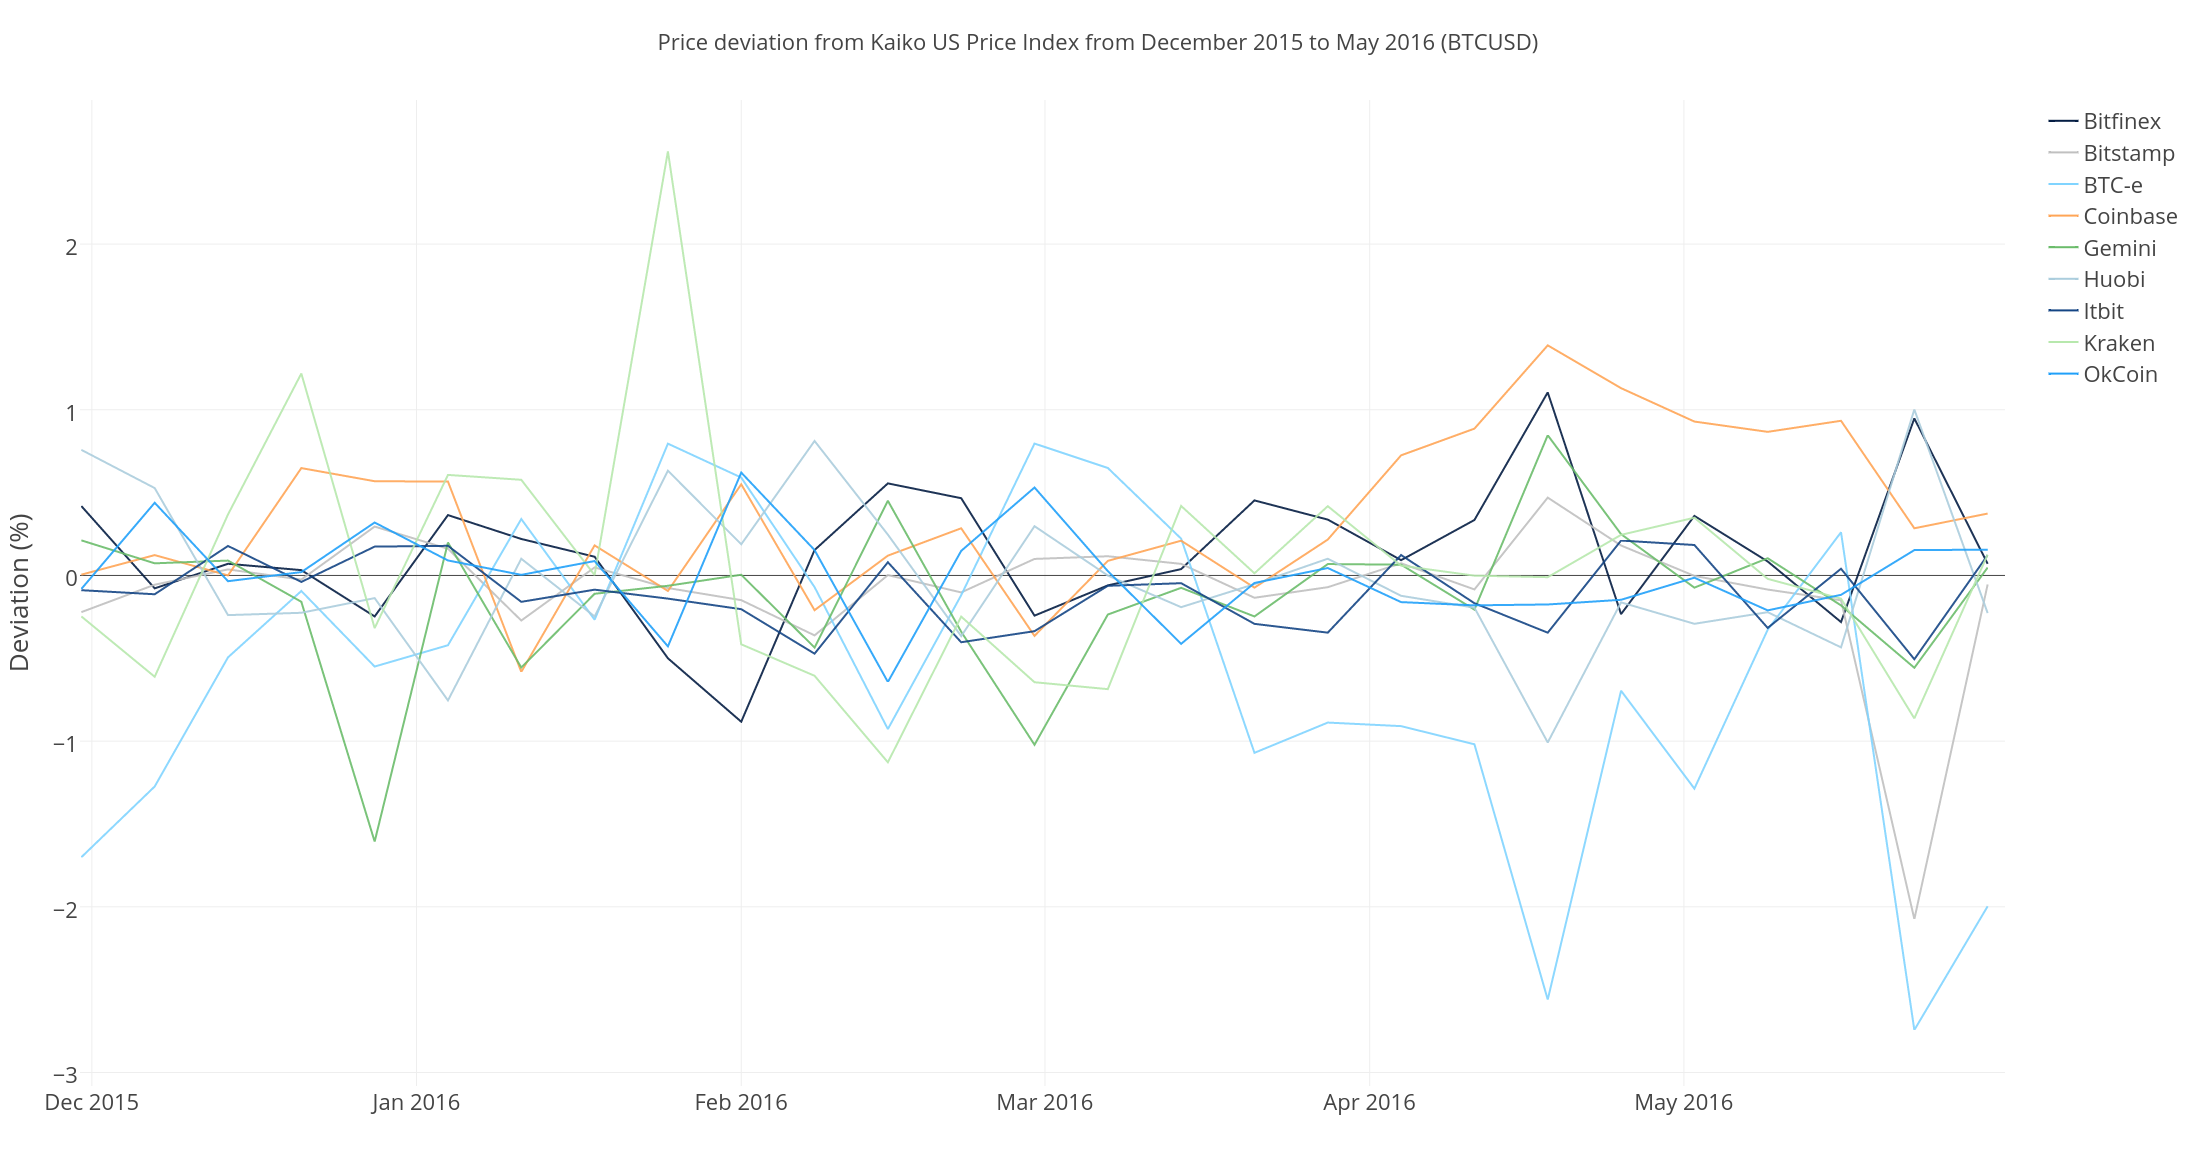 Price deviation from Kaiko US Price Index from December 2015 to May 2016 (BTCUSD)